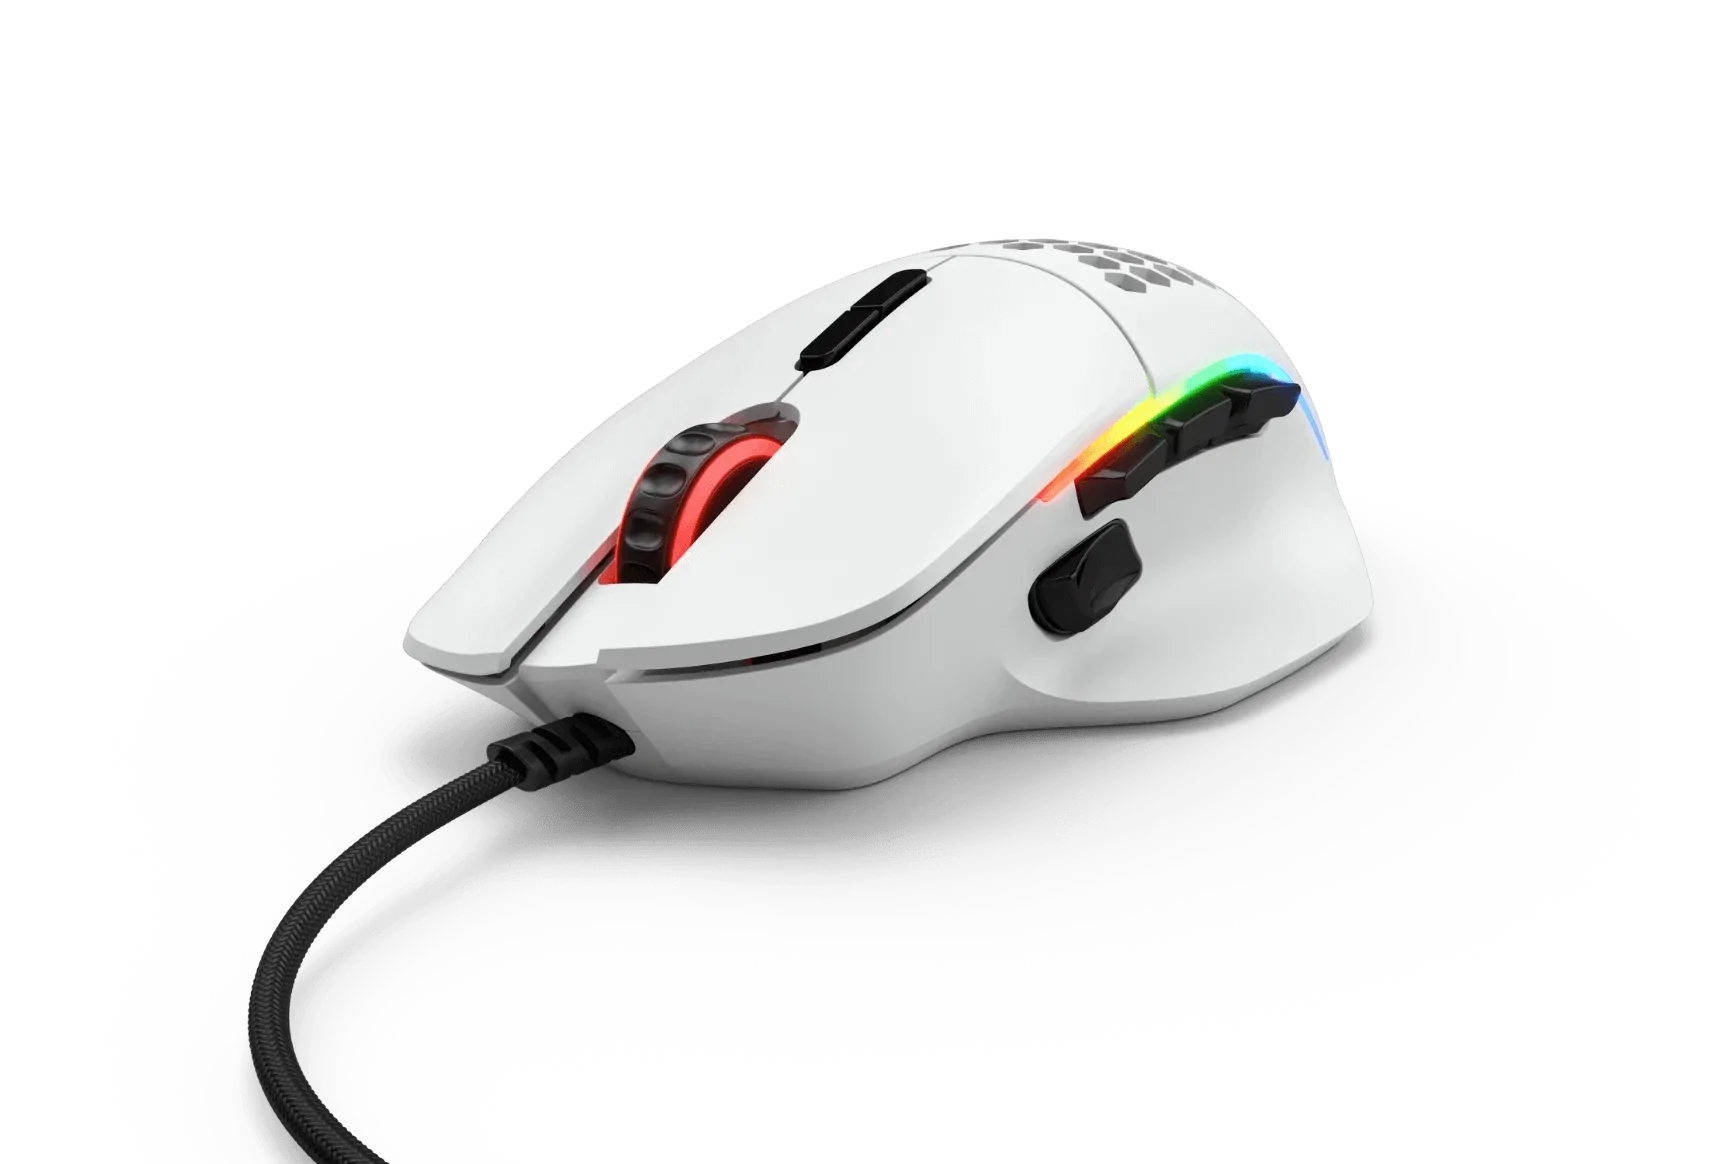 Glorious Gaming Mouse Model I - Matte White - Think24 Gaming & Gadgets Qatar